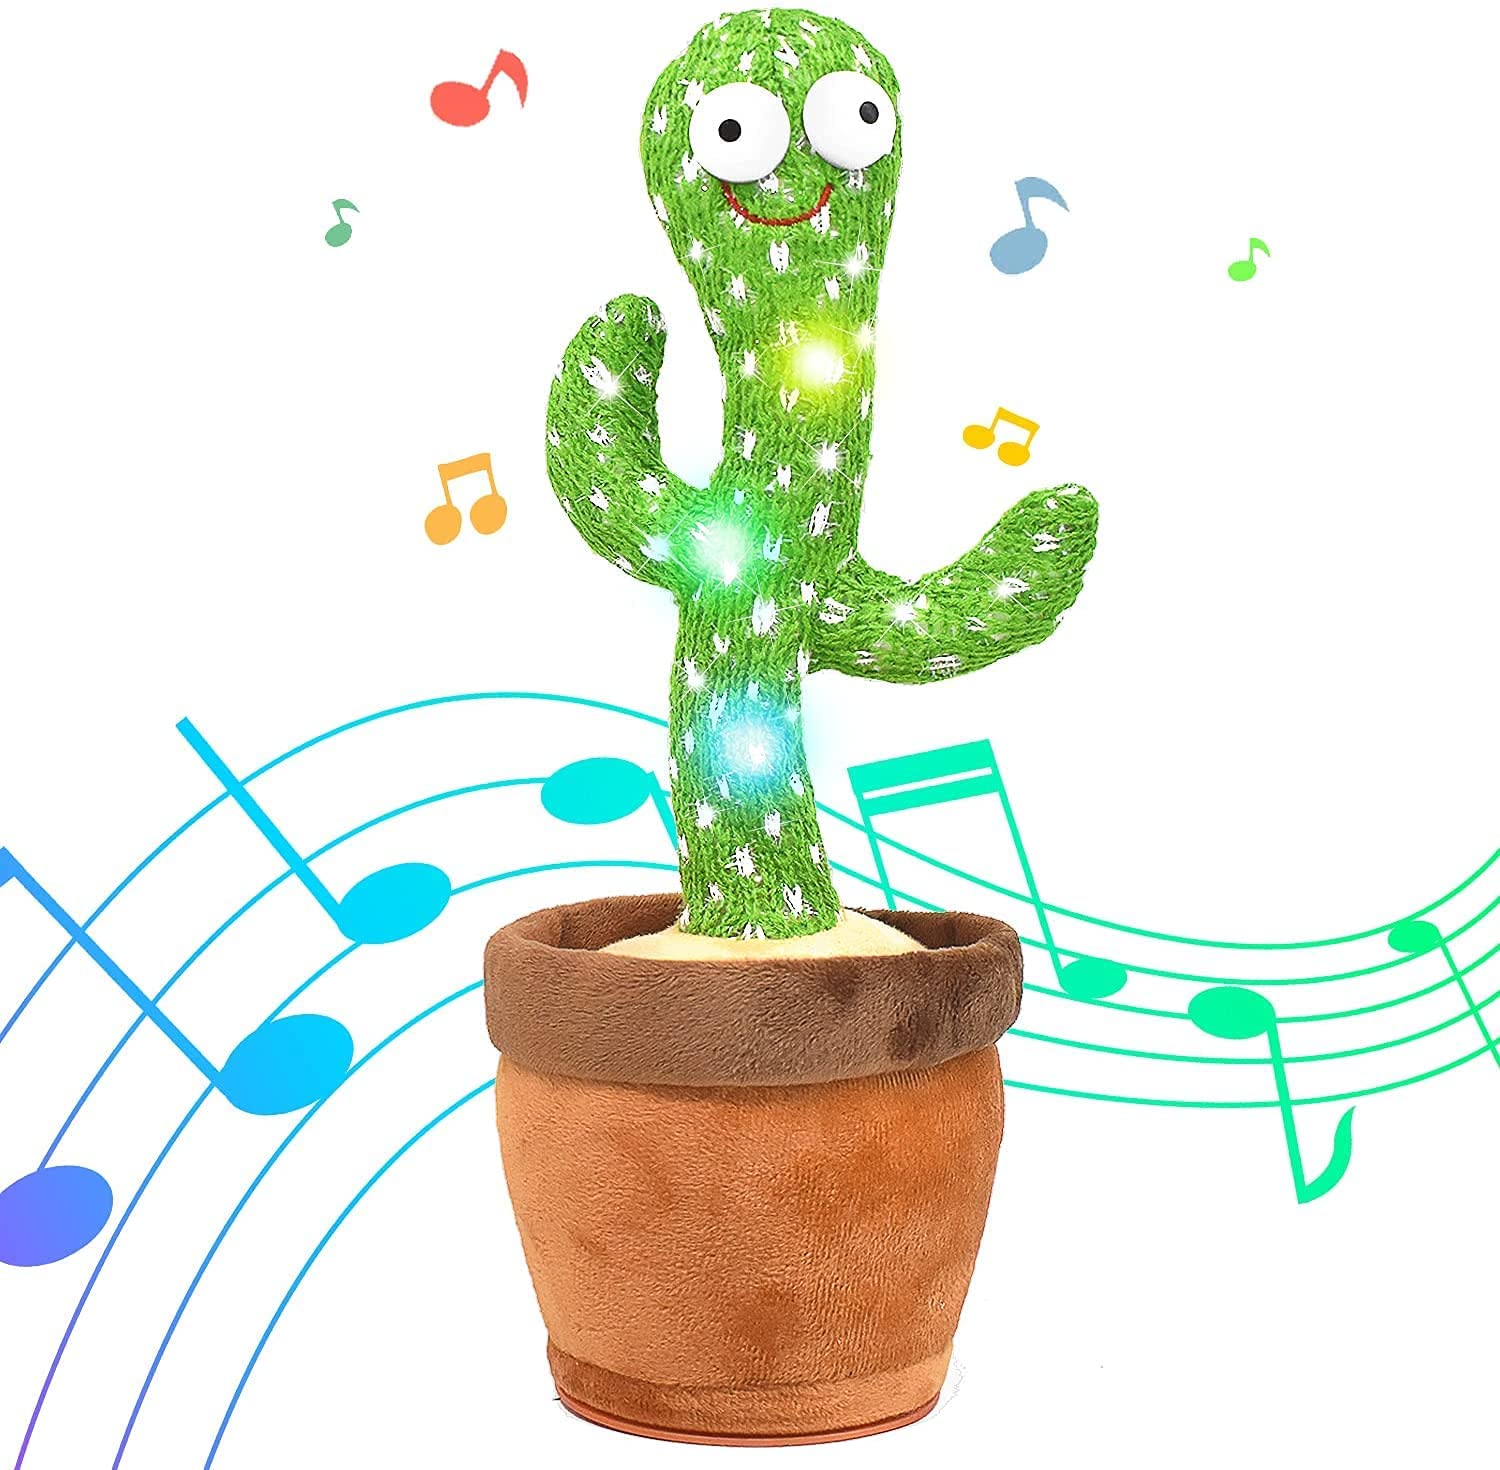 360 Dancing Cactus Toy - Homely Arts